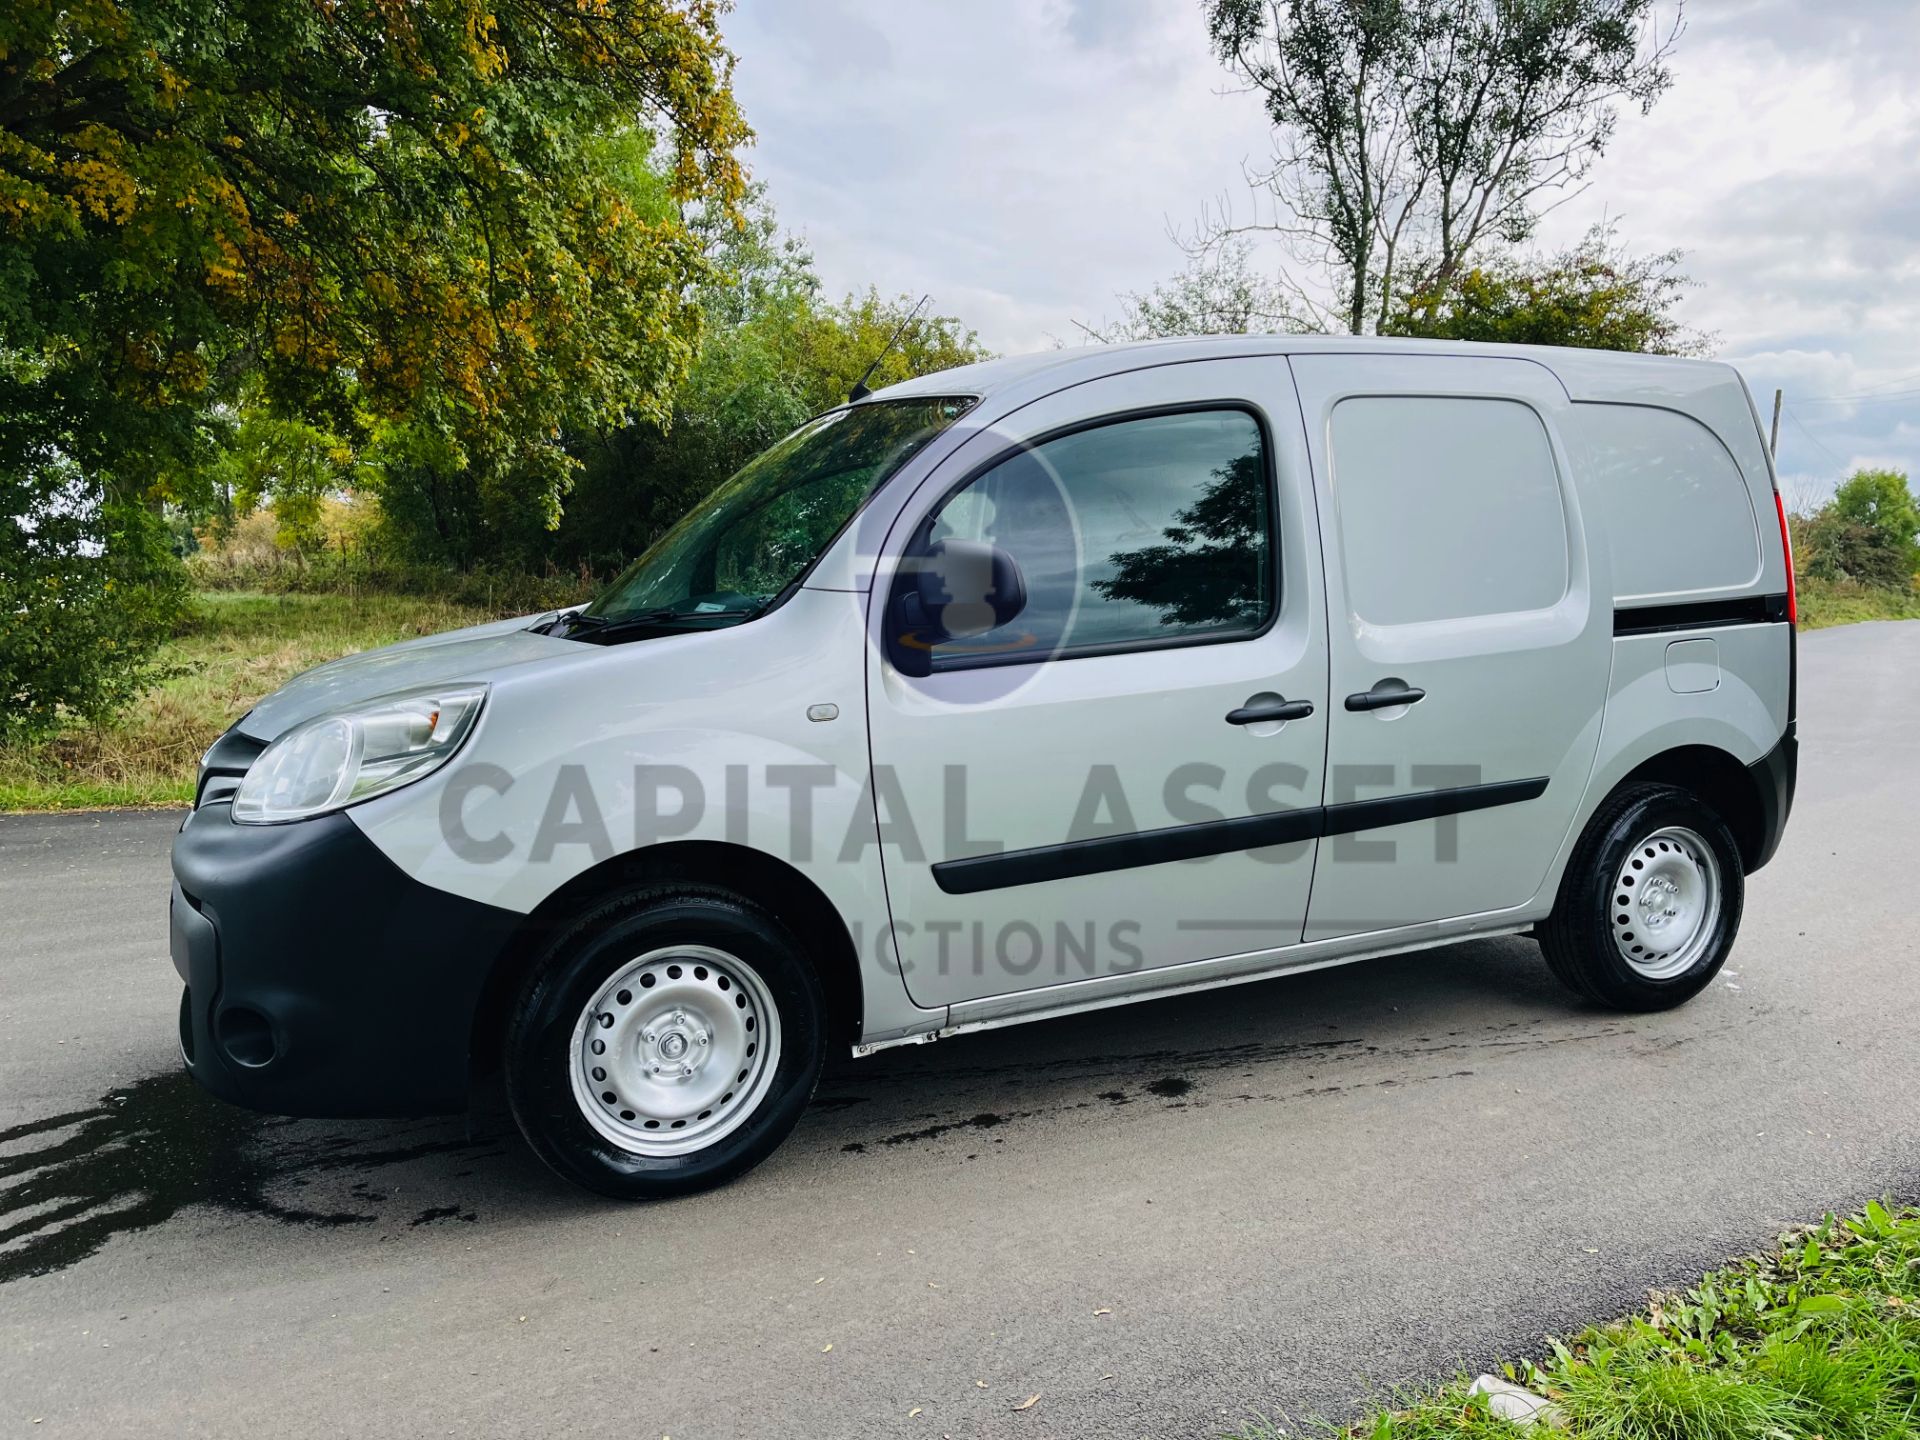 RENAULT KANGOO 1.5DCI "BUSINESS EDITION" (2018) EURO 6 - 6 SPEED - AIR CON - STOP / START -ELEC PACK - Image 7 of 22